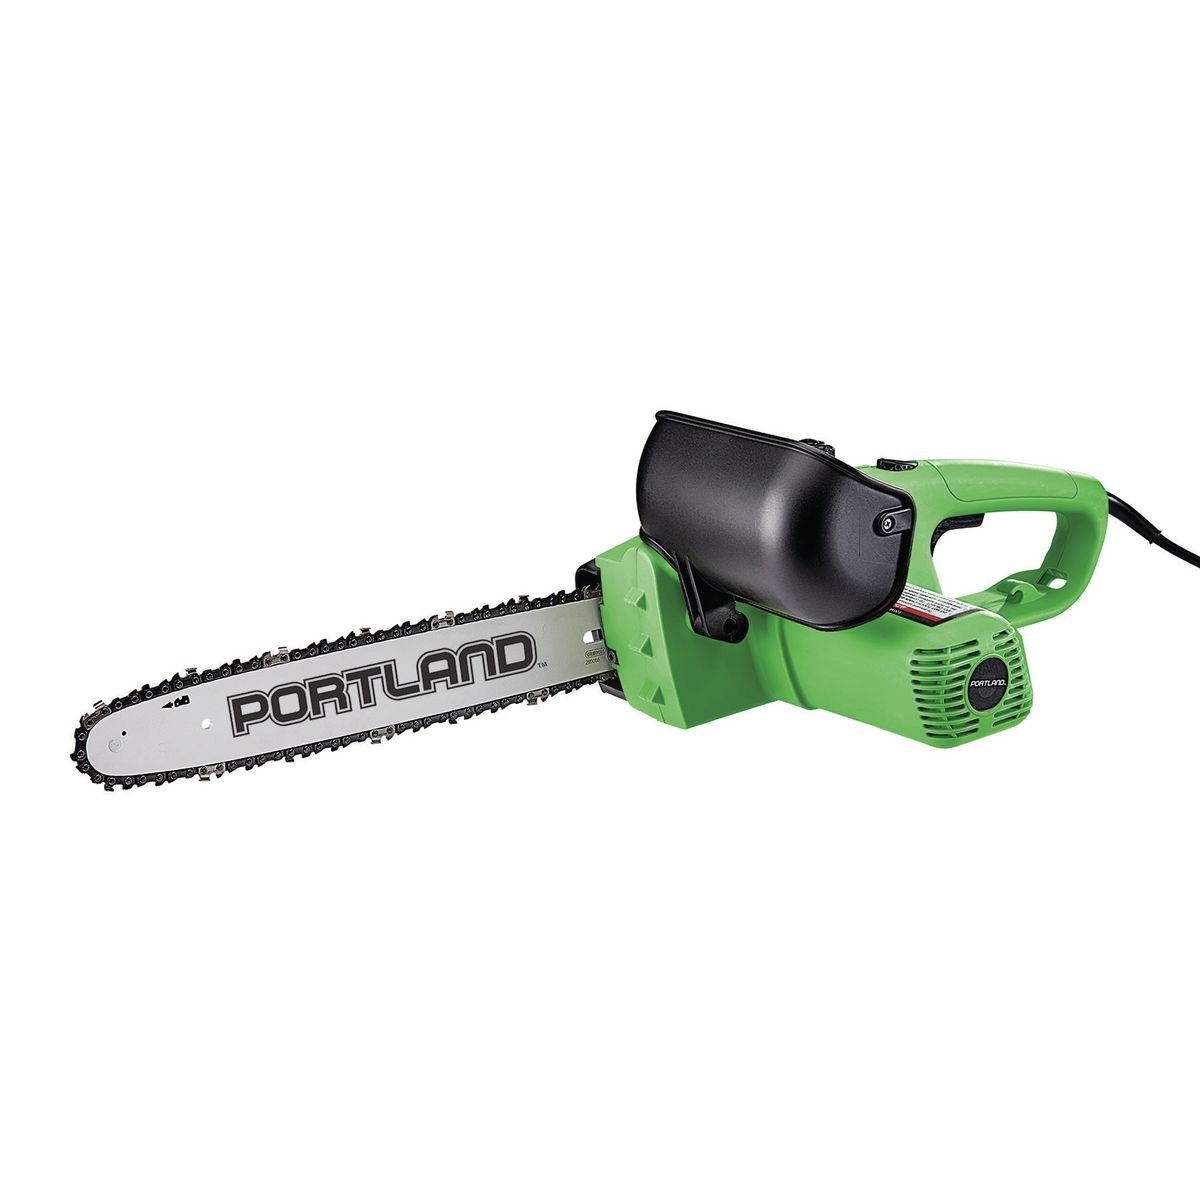 PORTLAND 9 Amp 14 In. Electric Chainsaw - Item 64497 / 64498